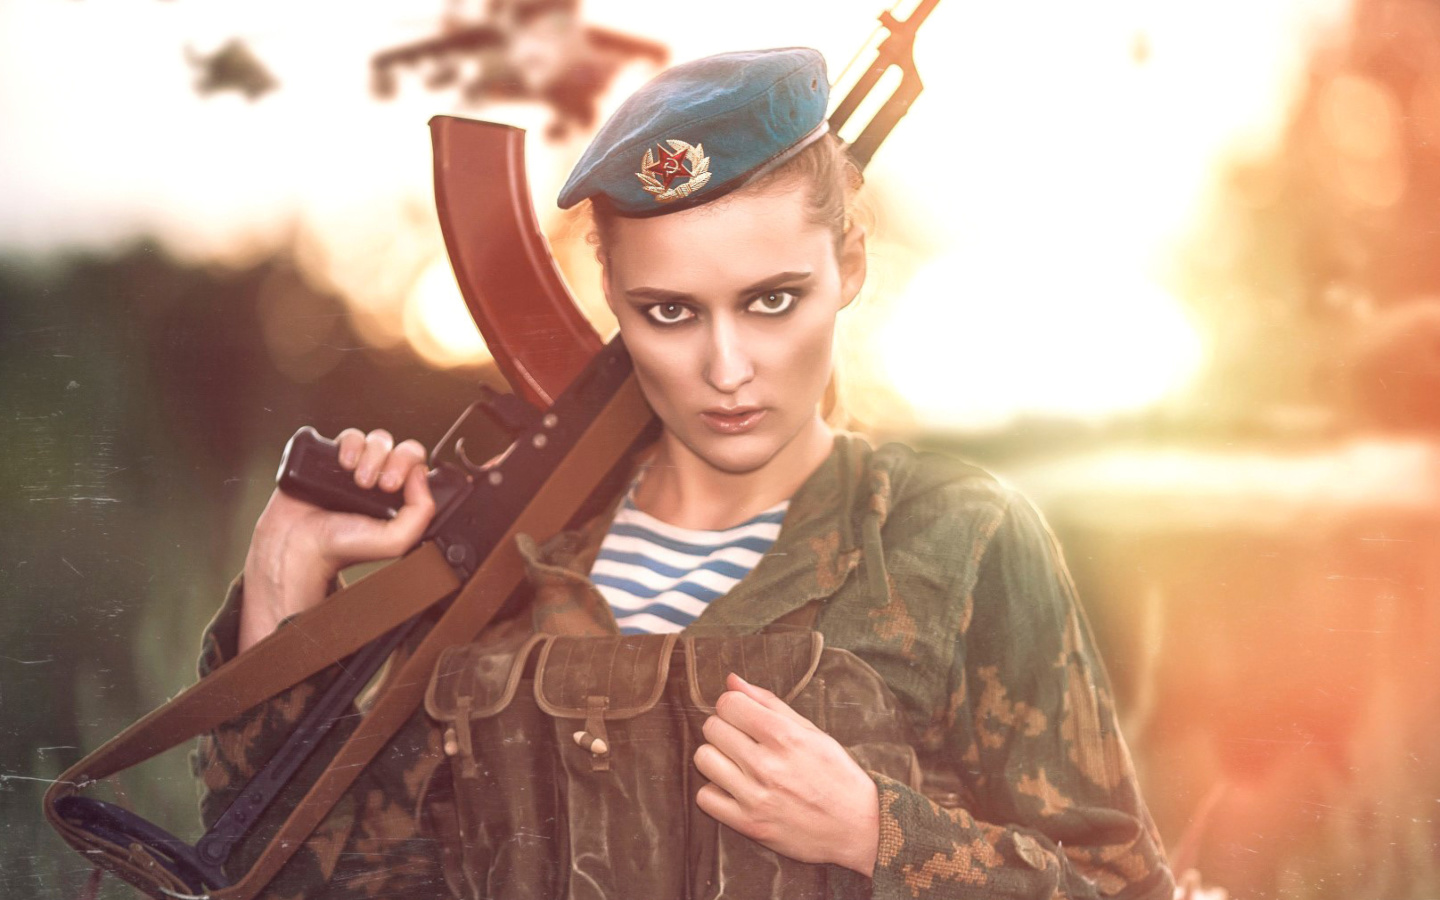 Russian Girl and Weapon HD wallpaper 1440x900